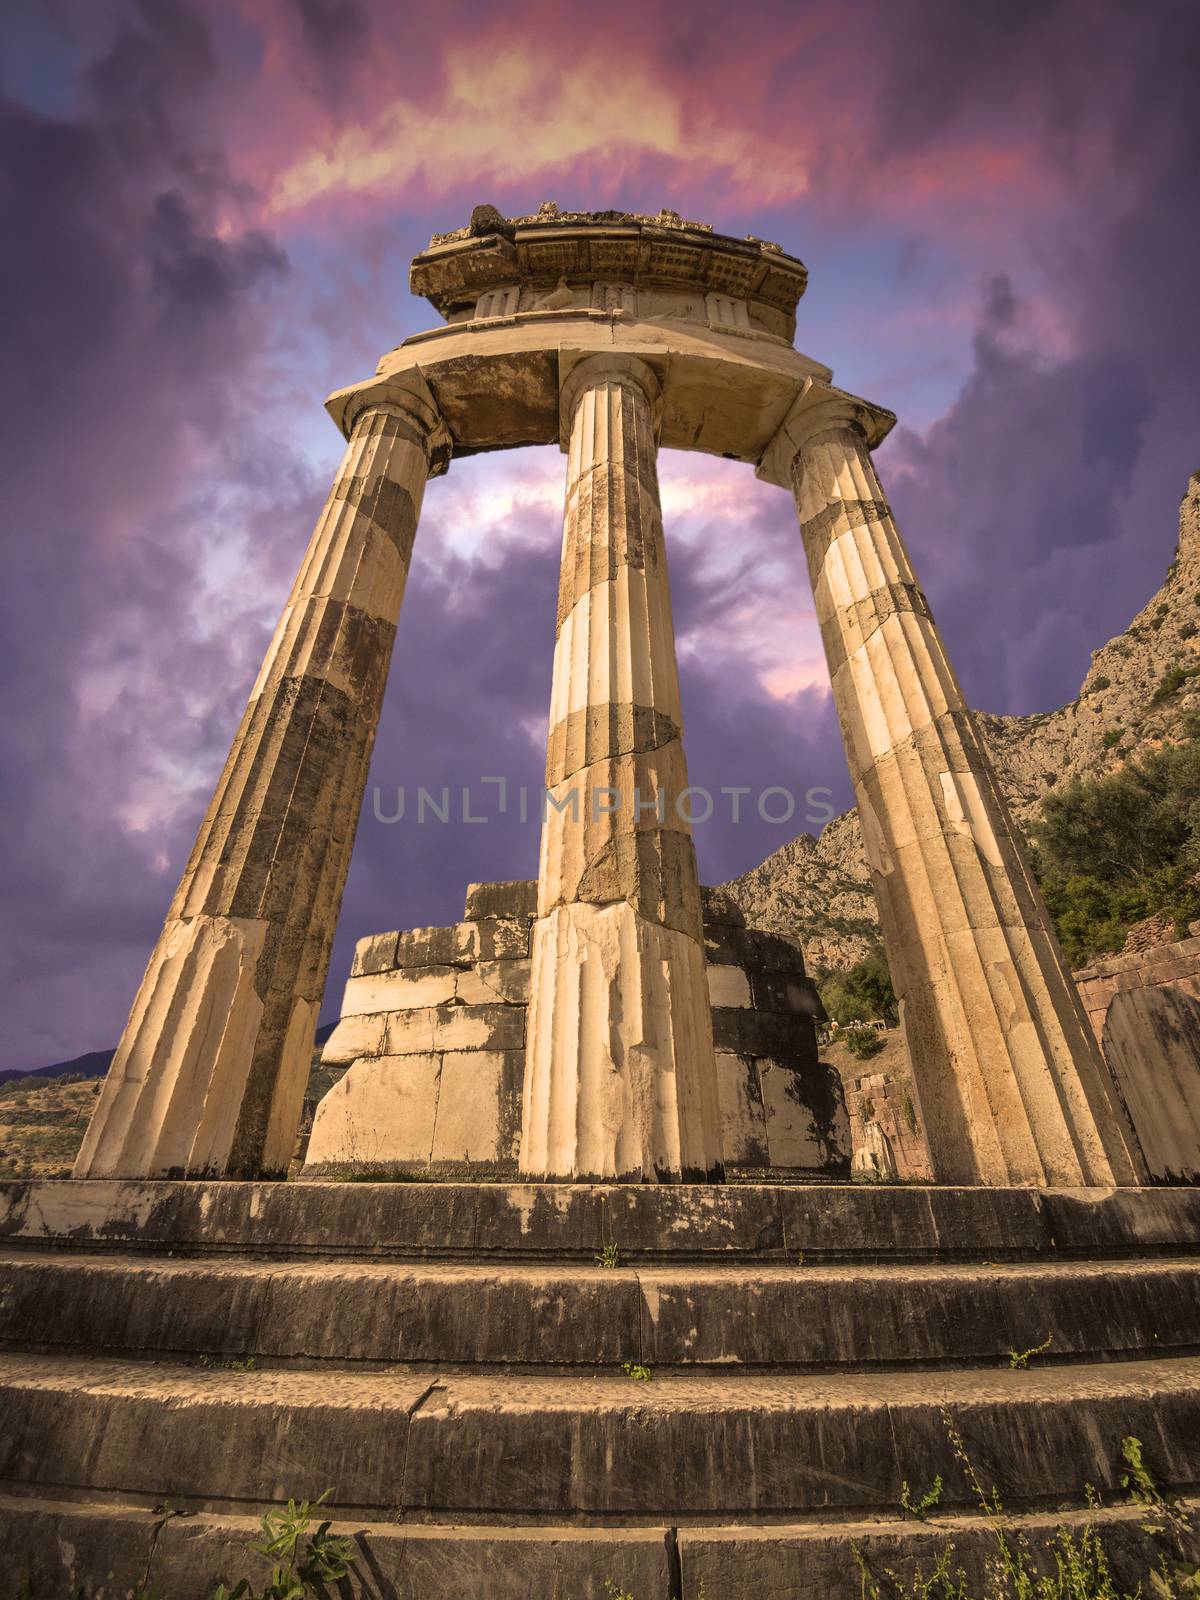 The Tholos at Delphi, Greece by f/2sumicron